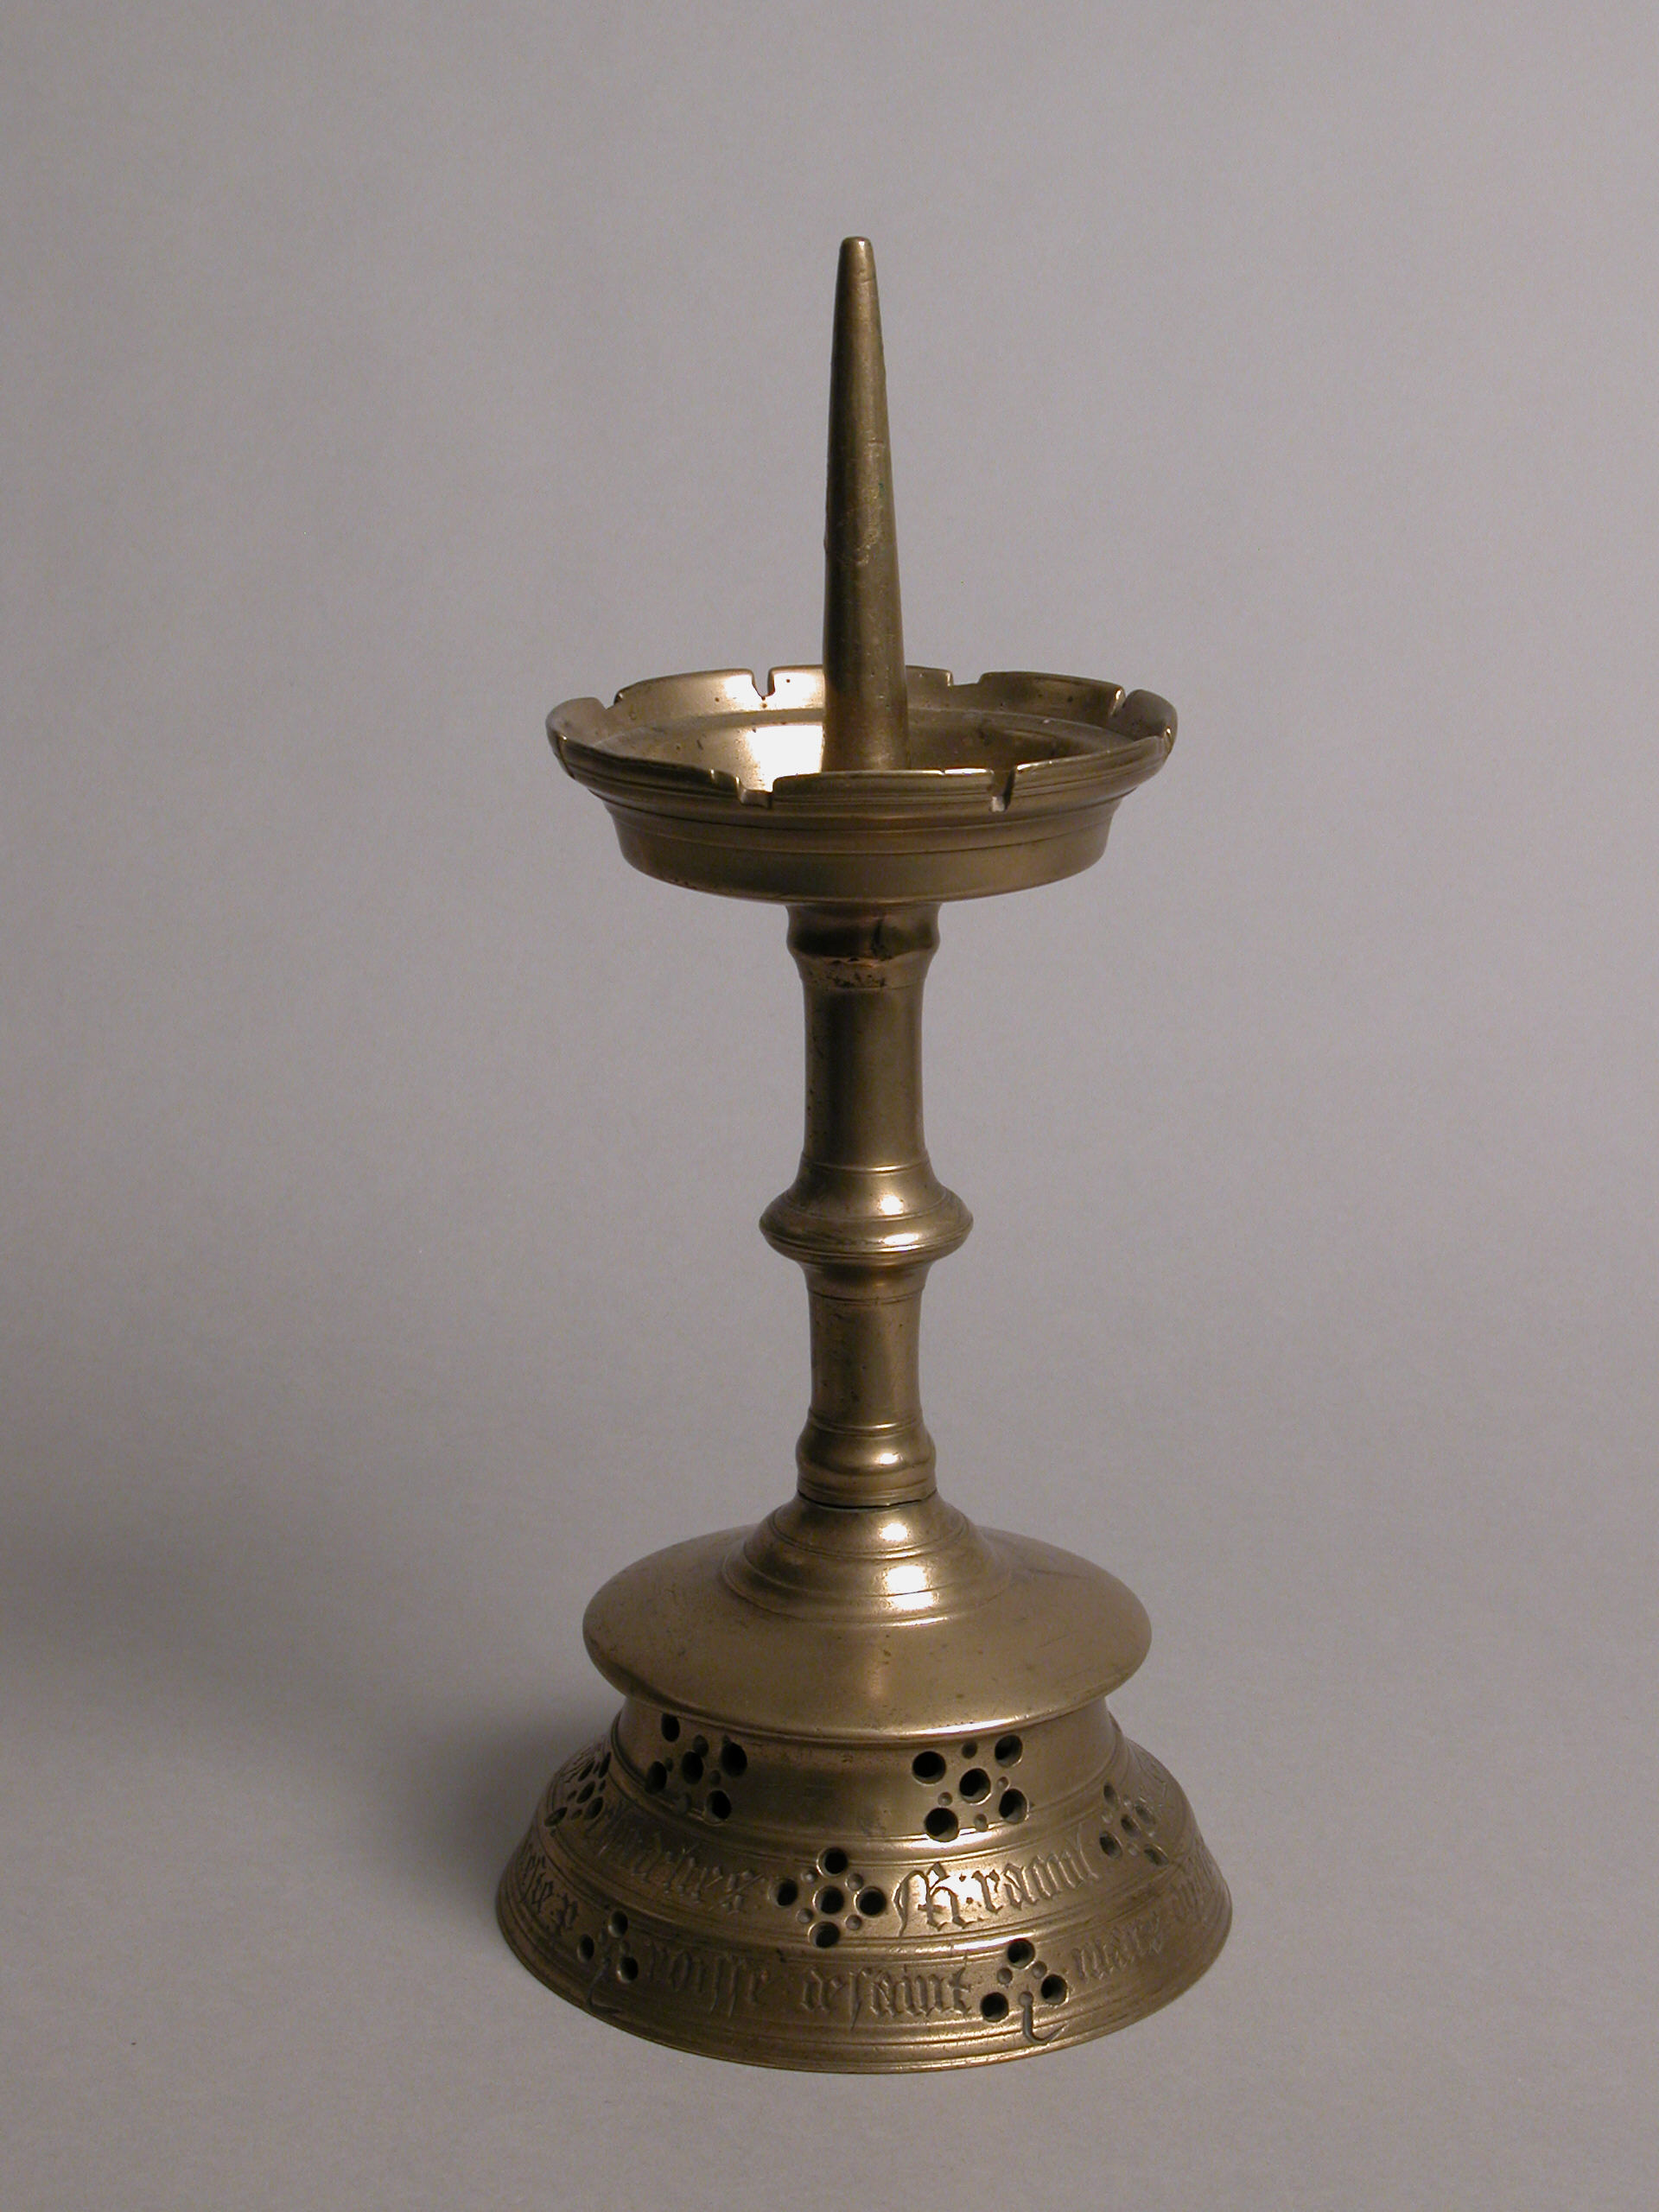 Pricket Candlestick, French